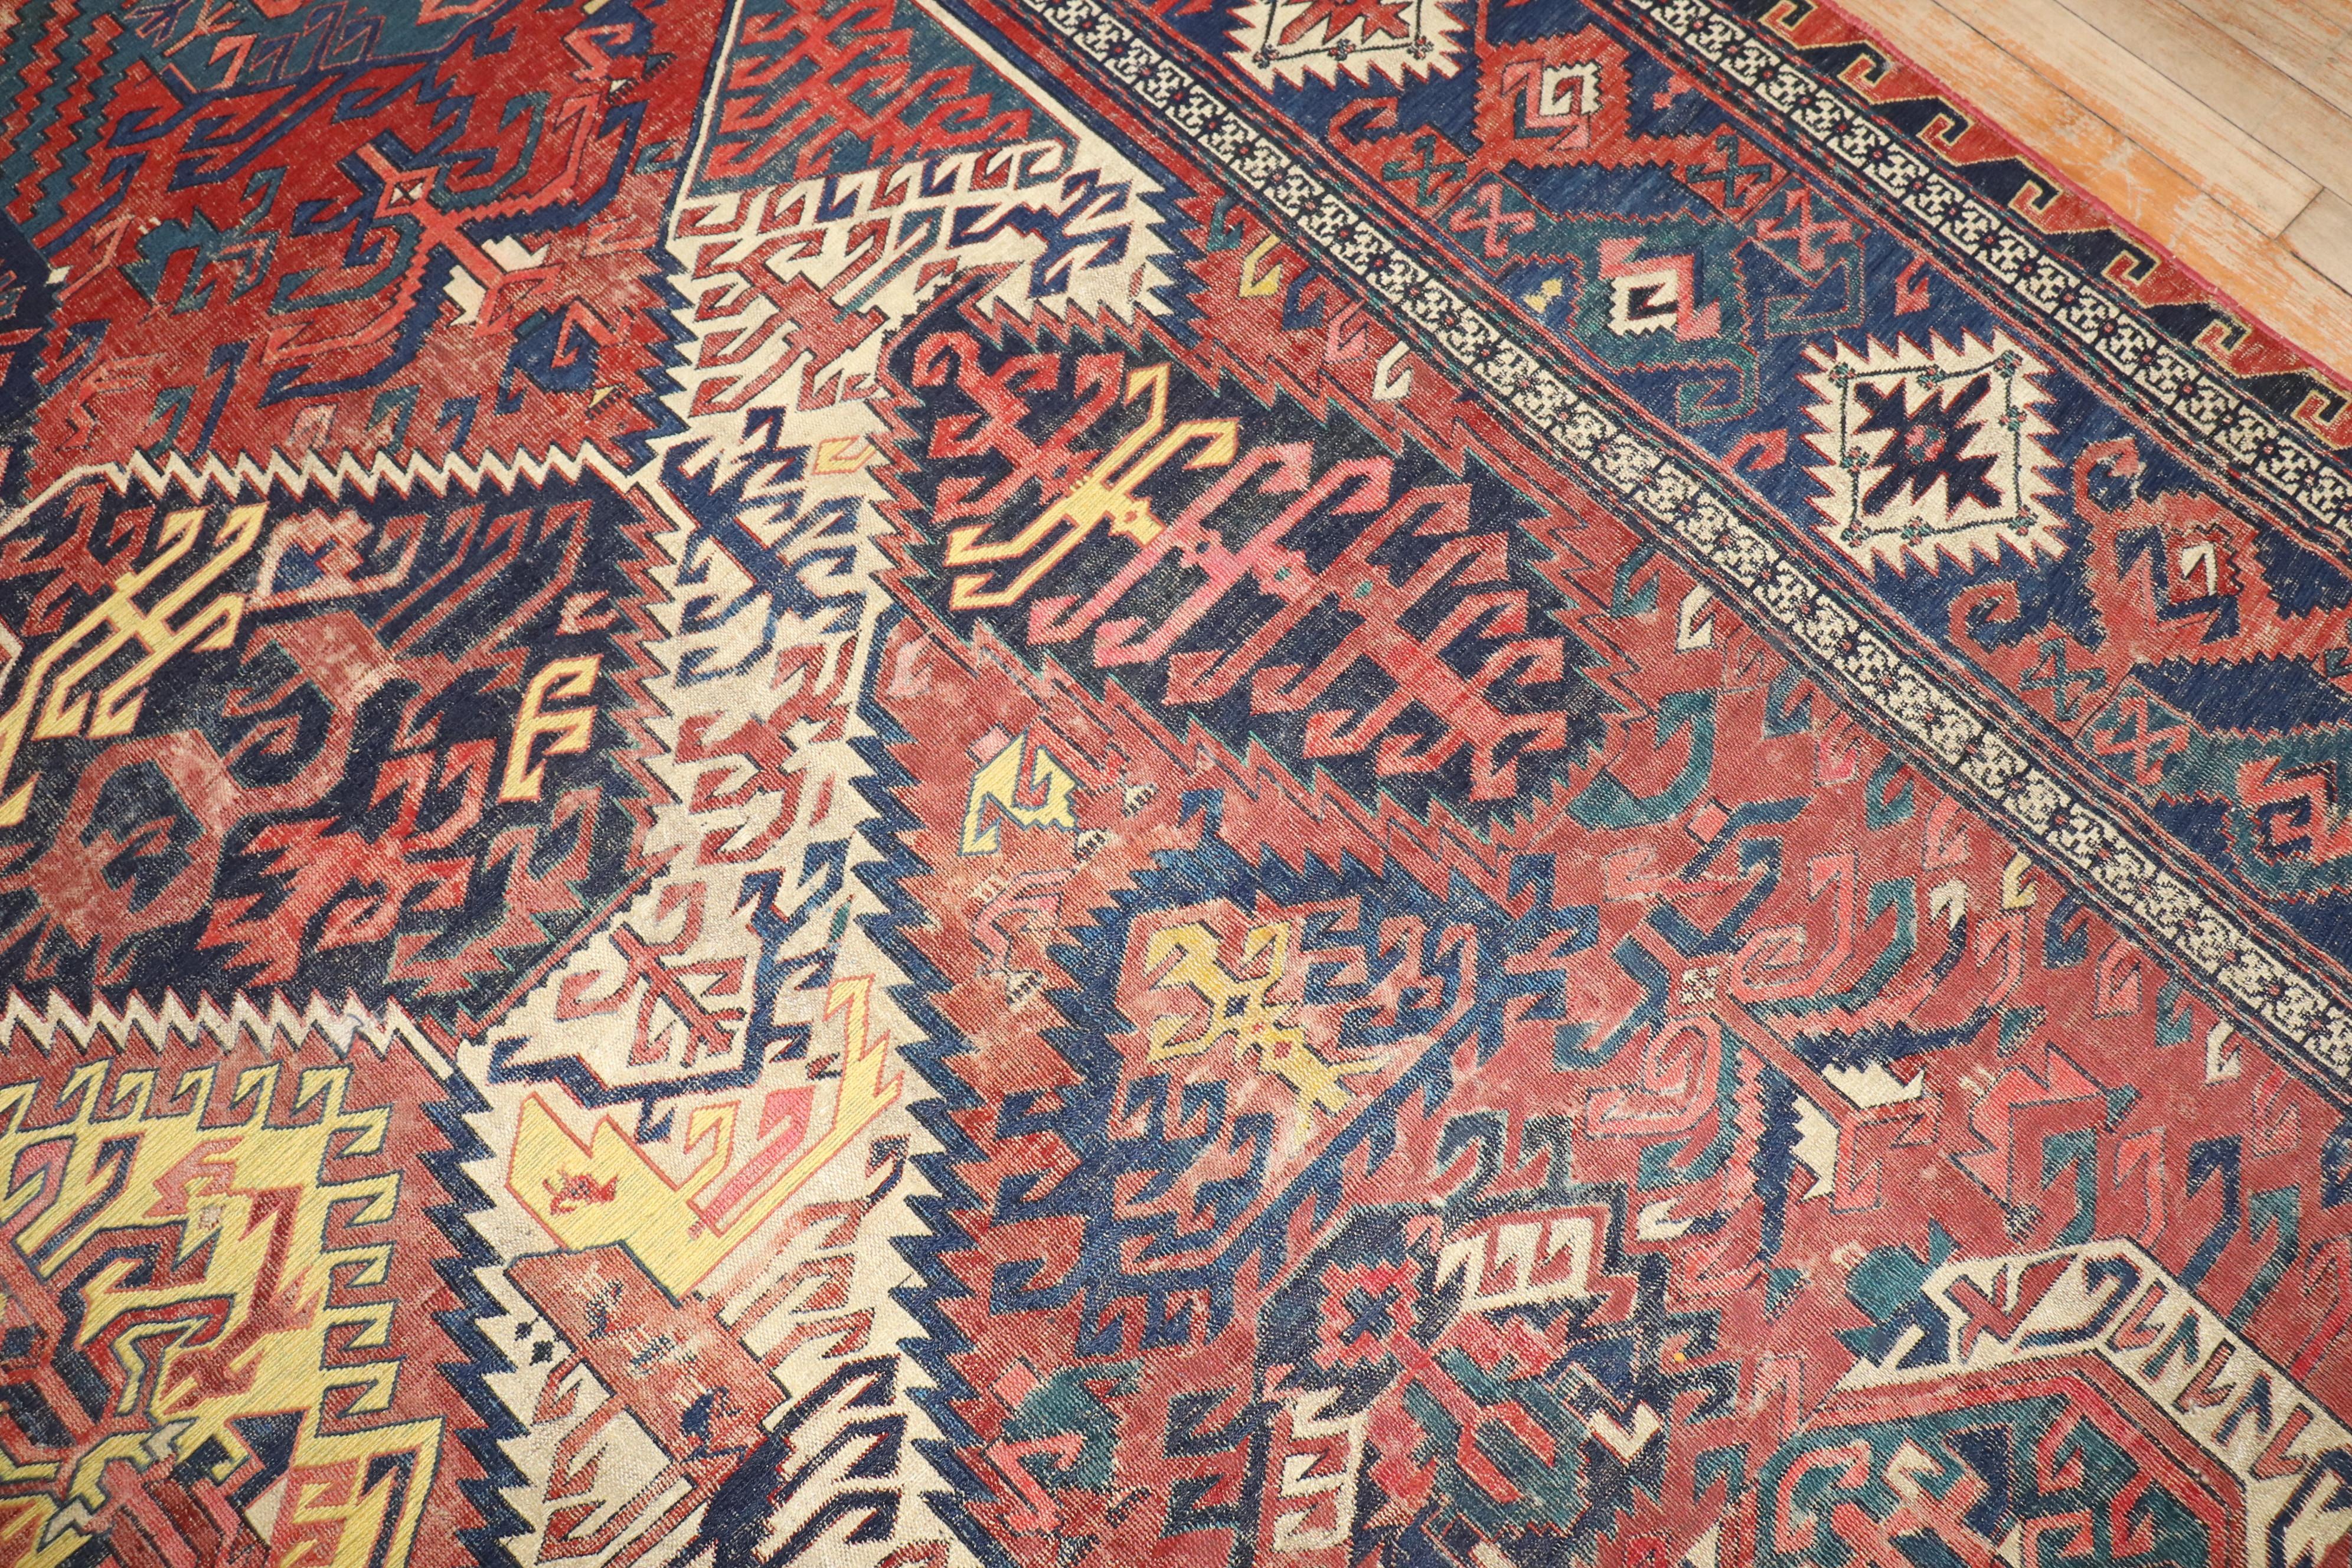 Zabihi Collection 19th Century Rare Dragon Soumac Flat-Weave Rug In Fair Condition For Sale In New York, NY